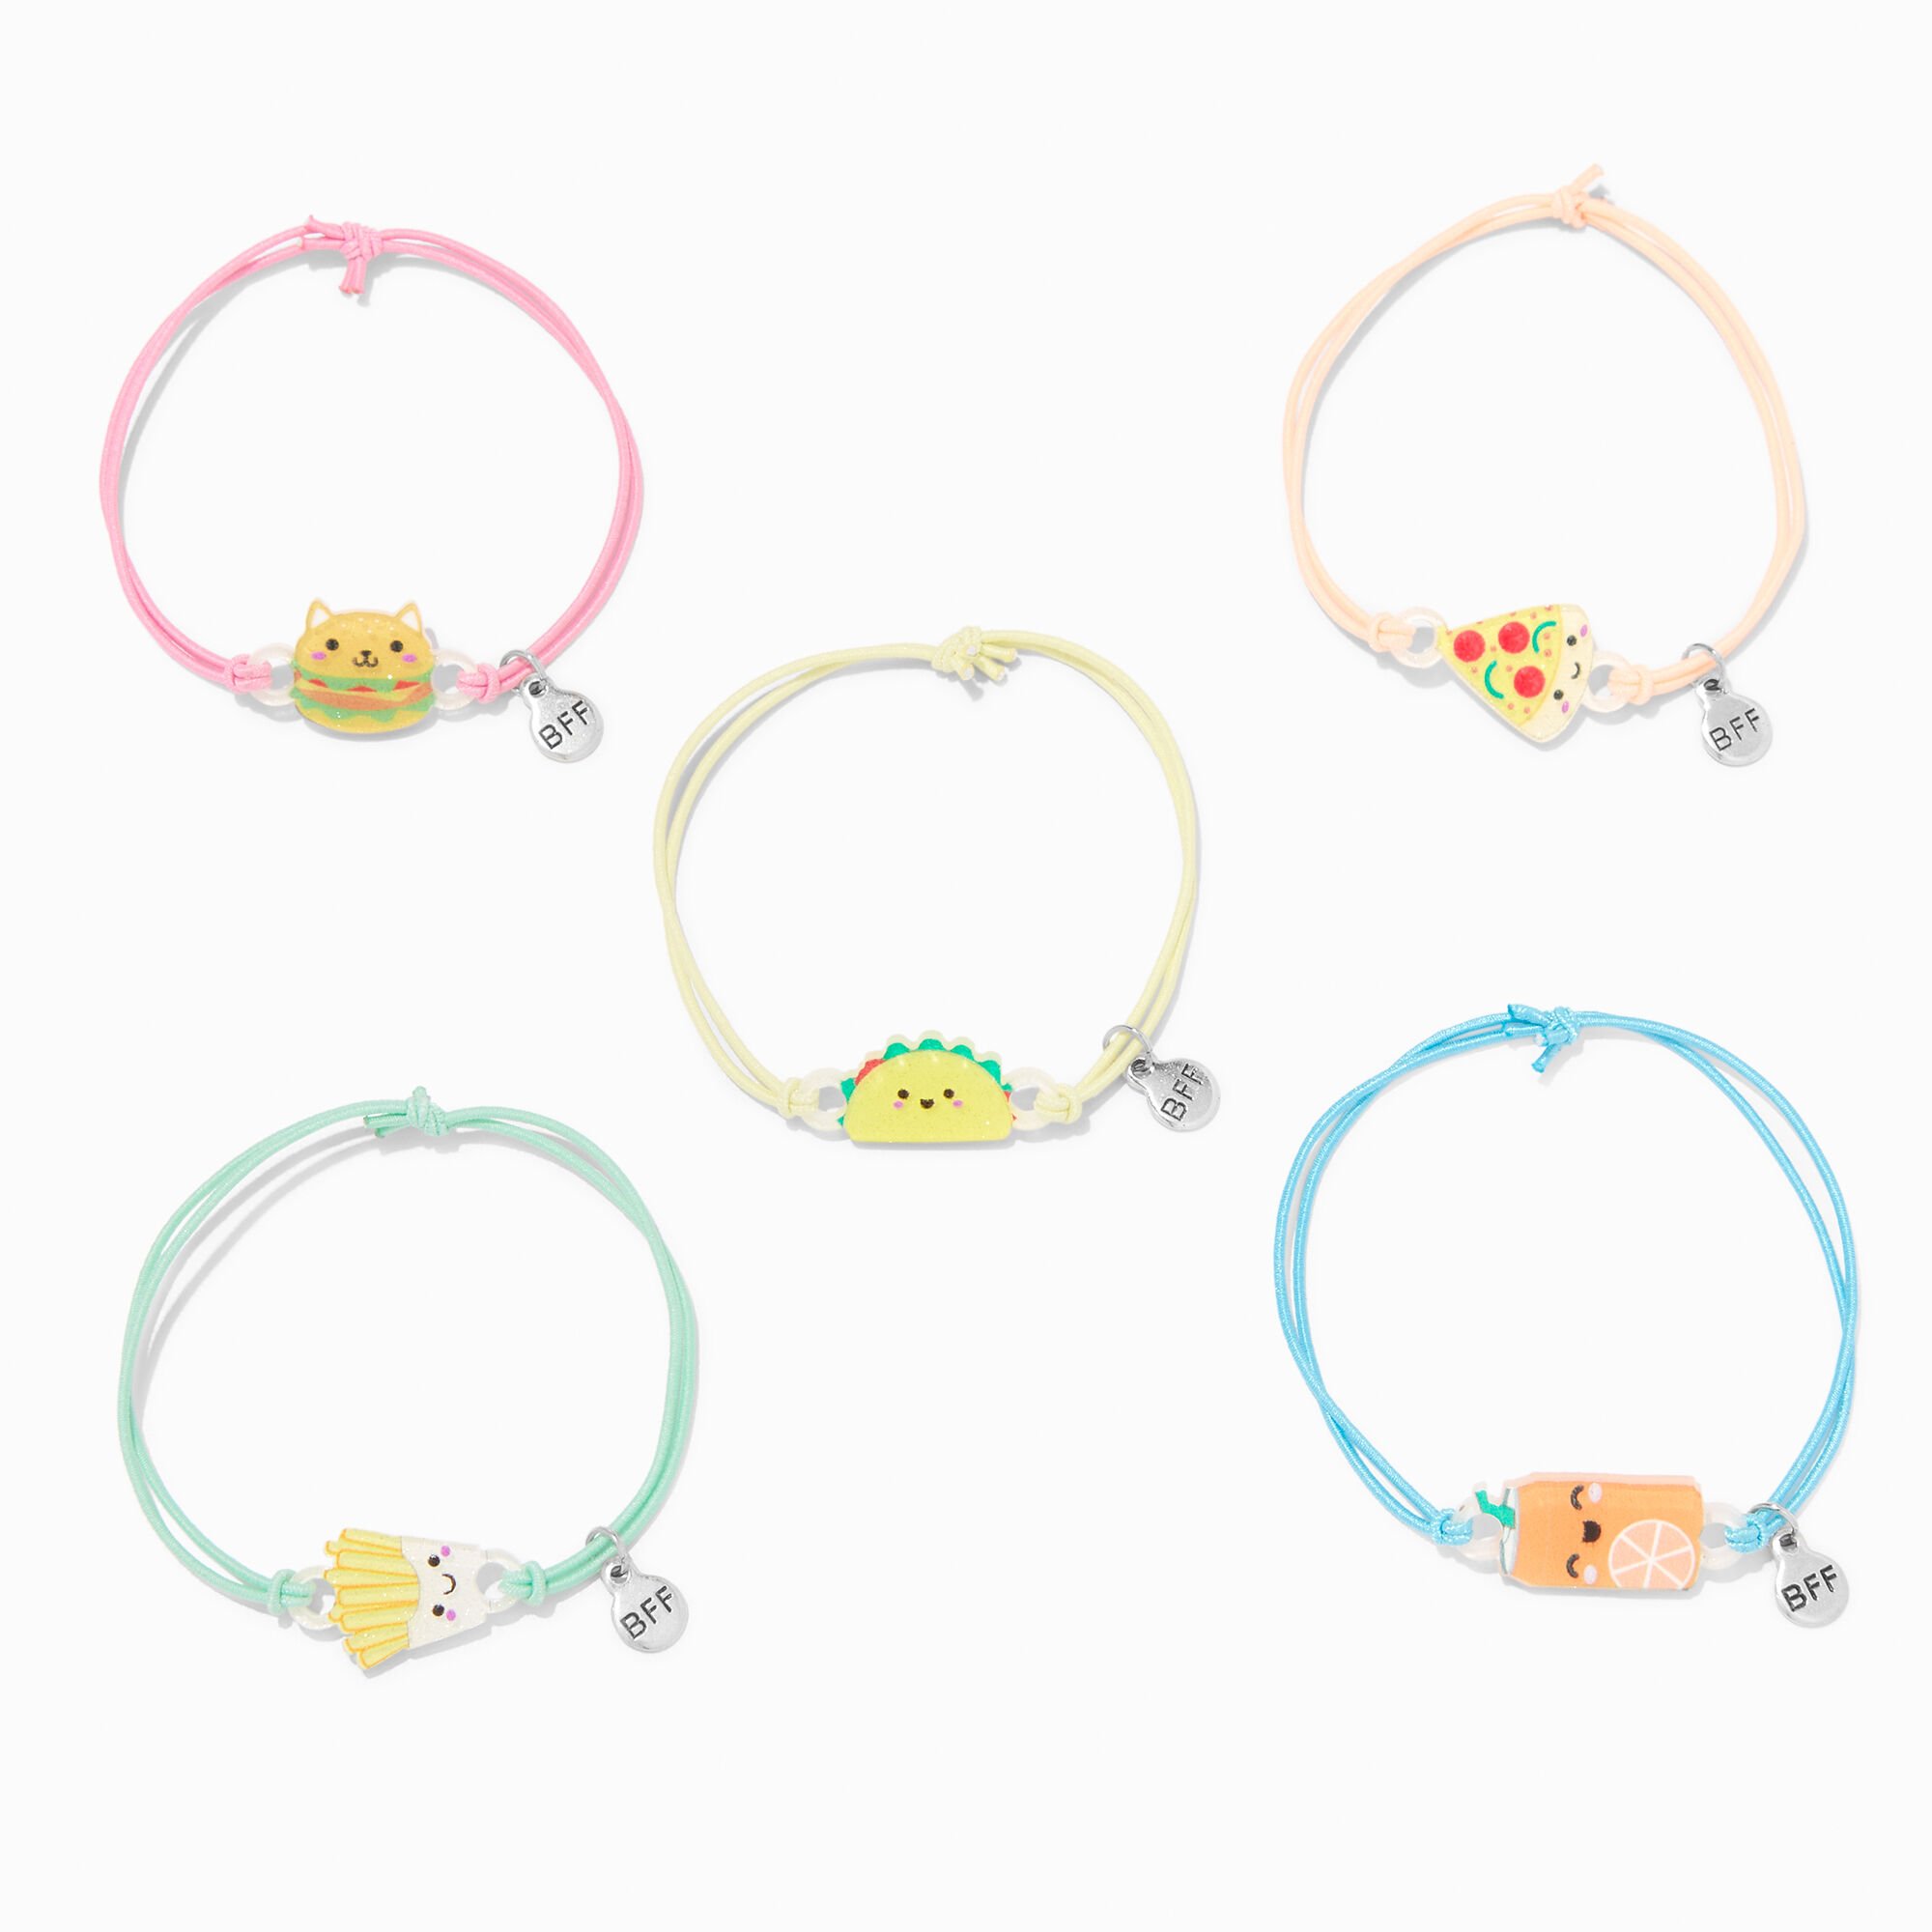 View Claires Cute Critter Food Adjustable Friendship Bracelets 5 Pack information